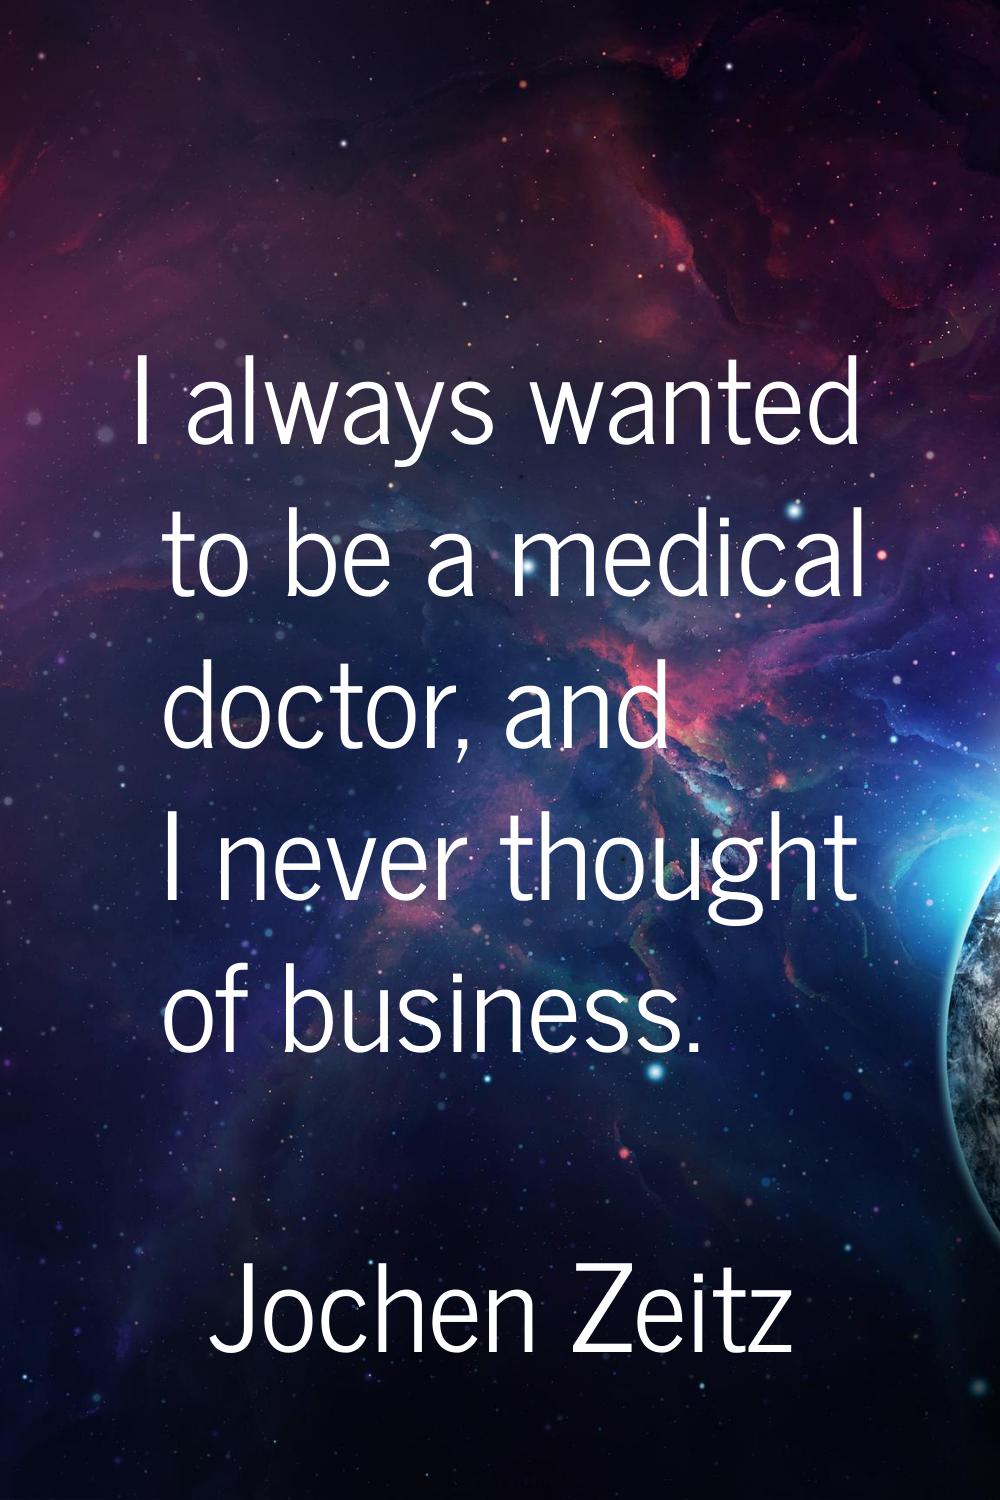 I always wanted to be a medical doctor, and I never thought of business.